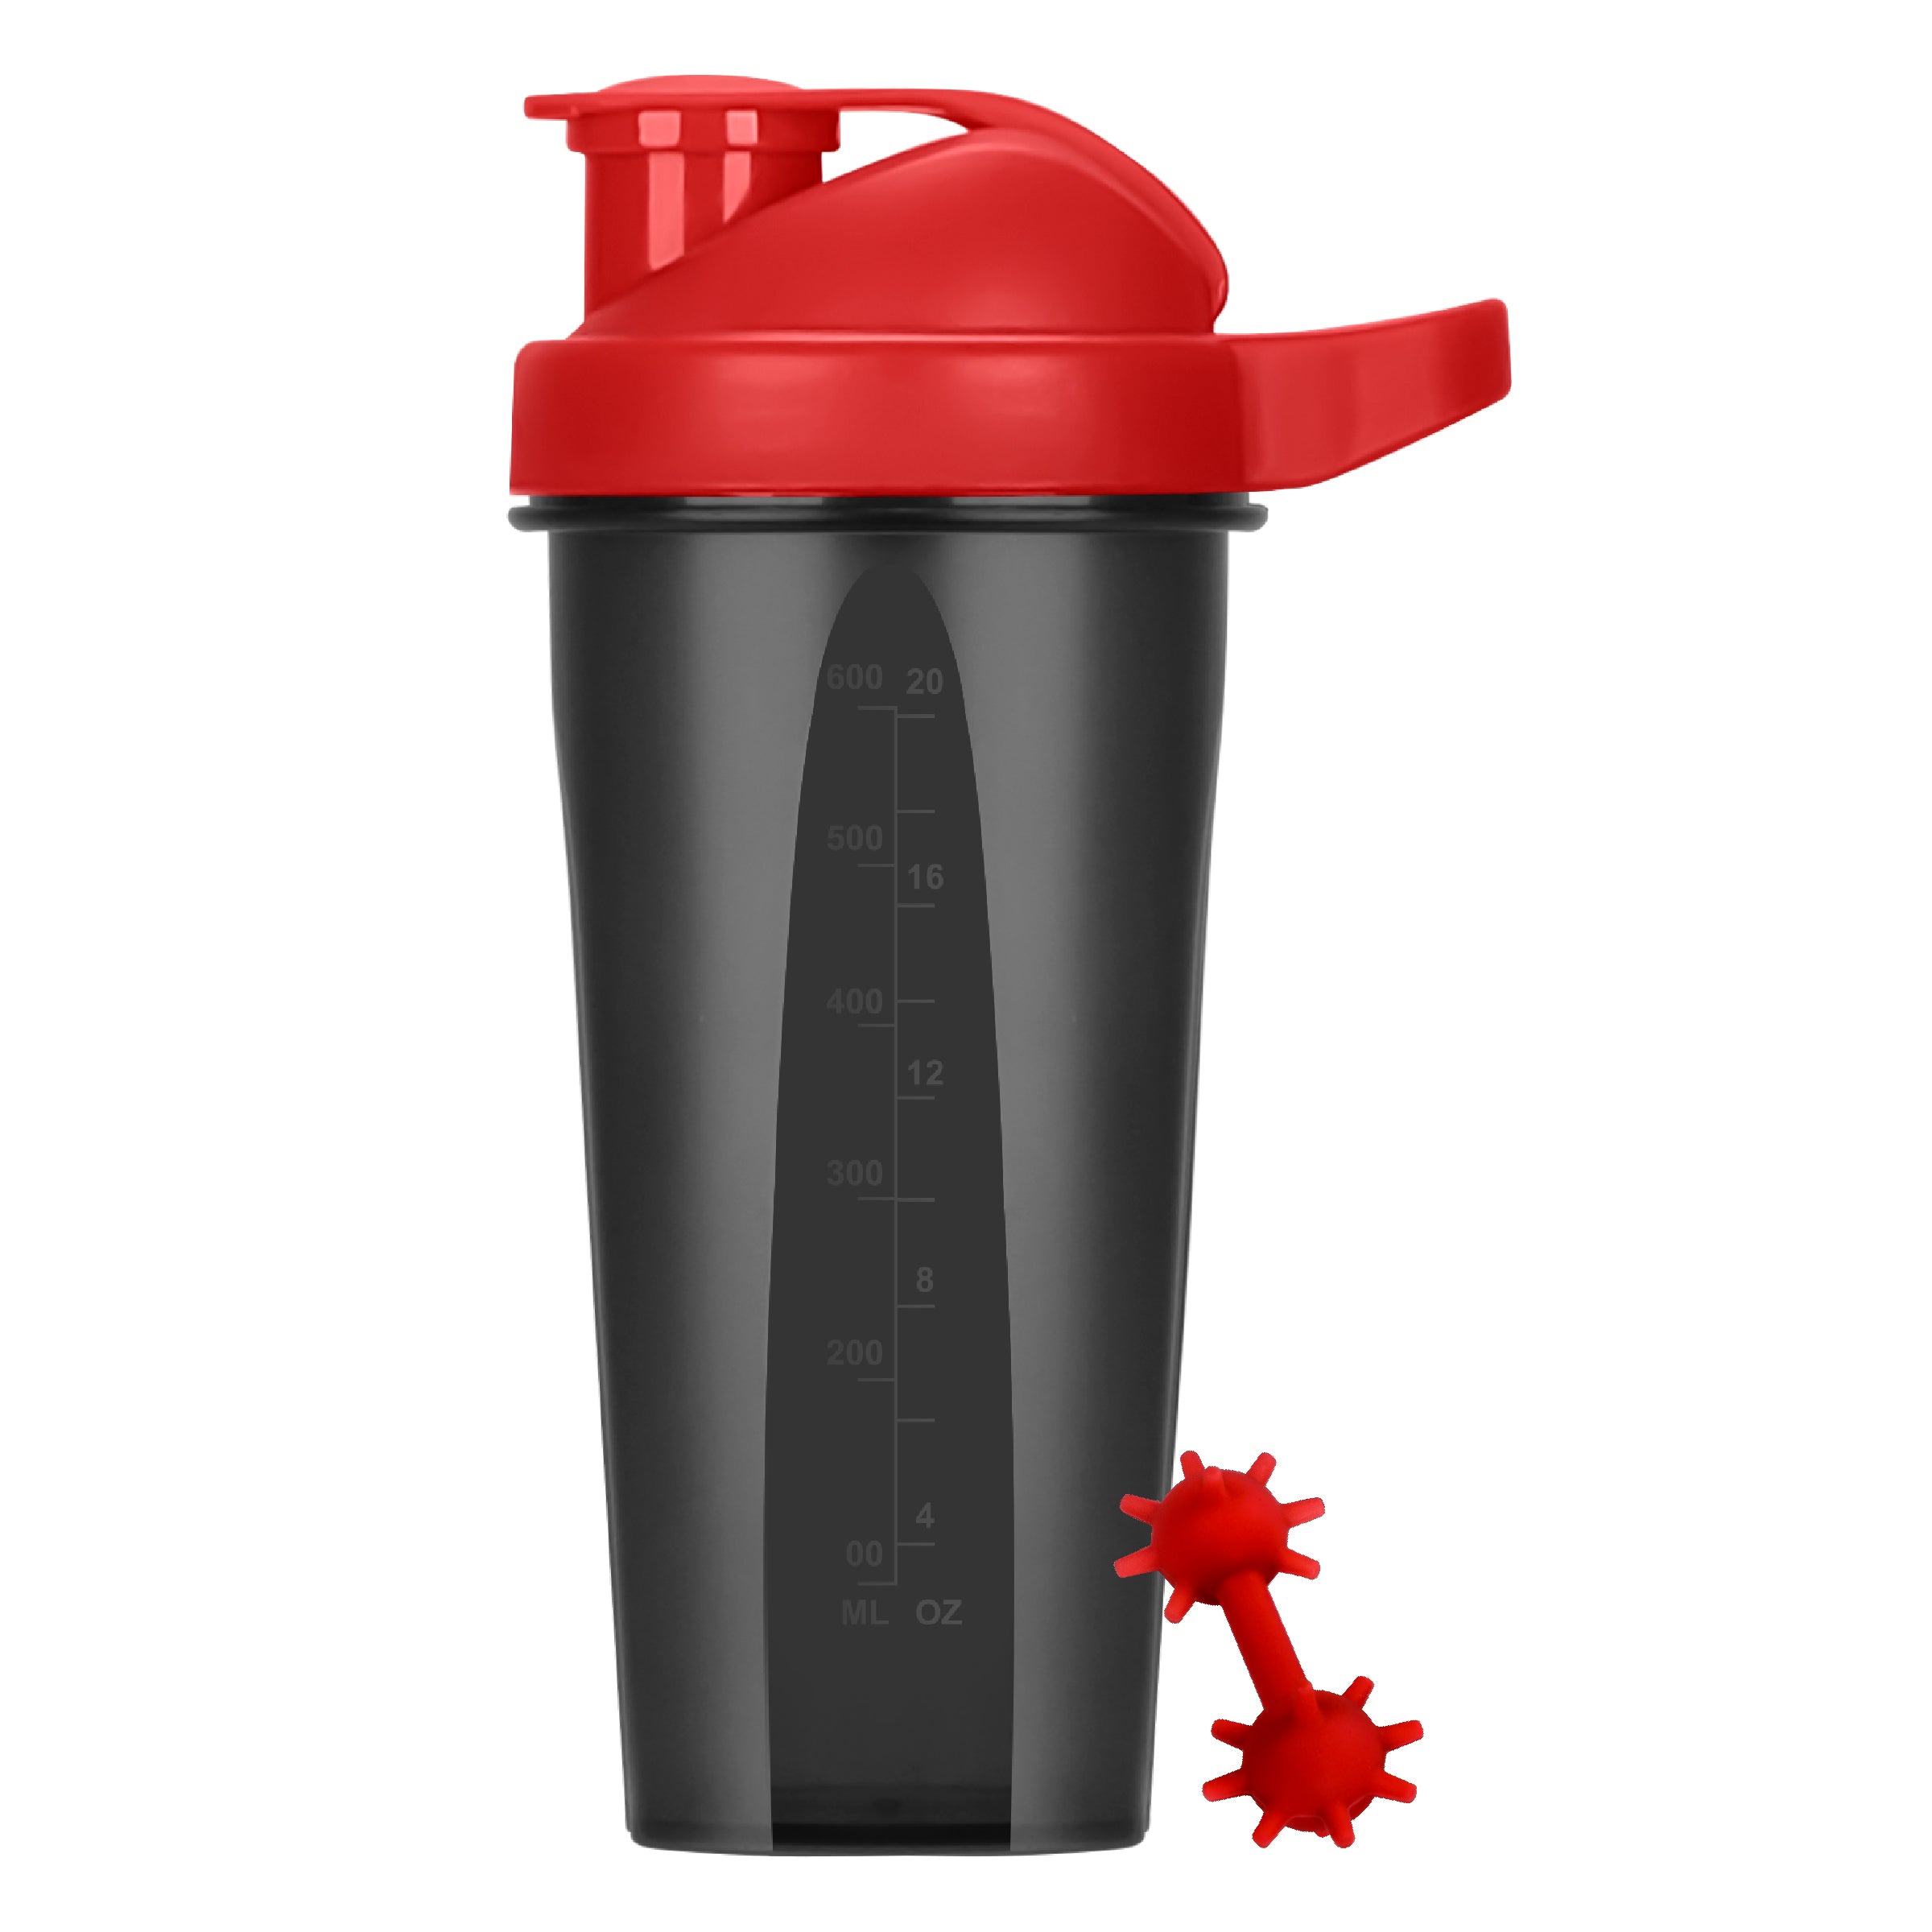 Replacement Lid for 24oz Shaker Bottle